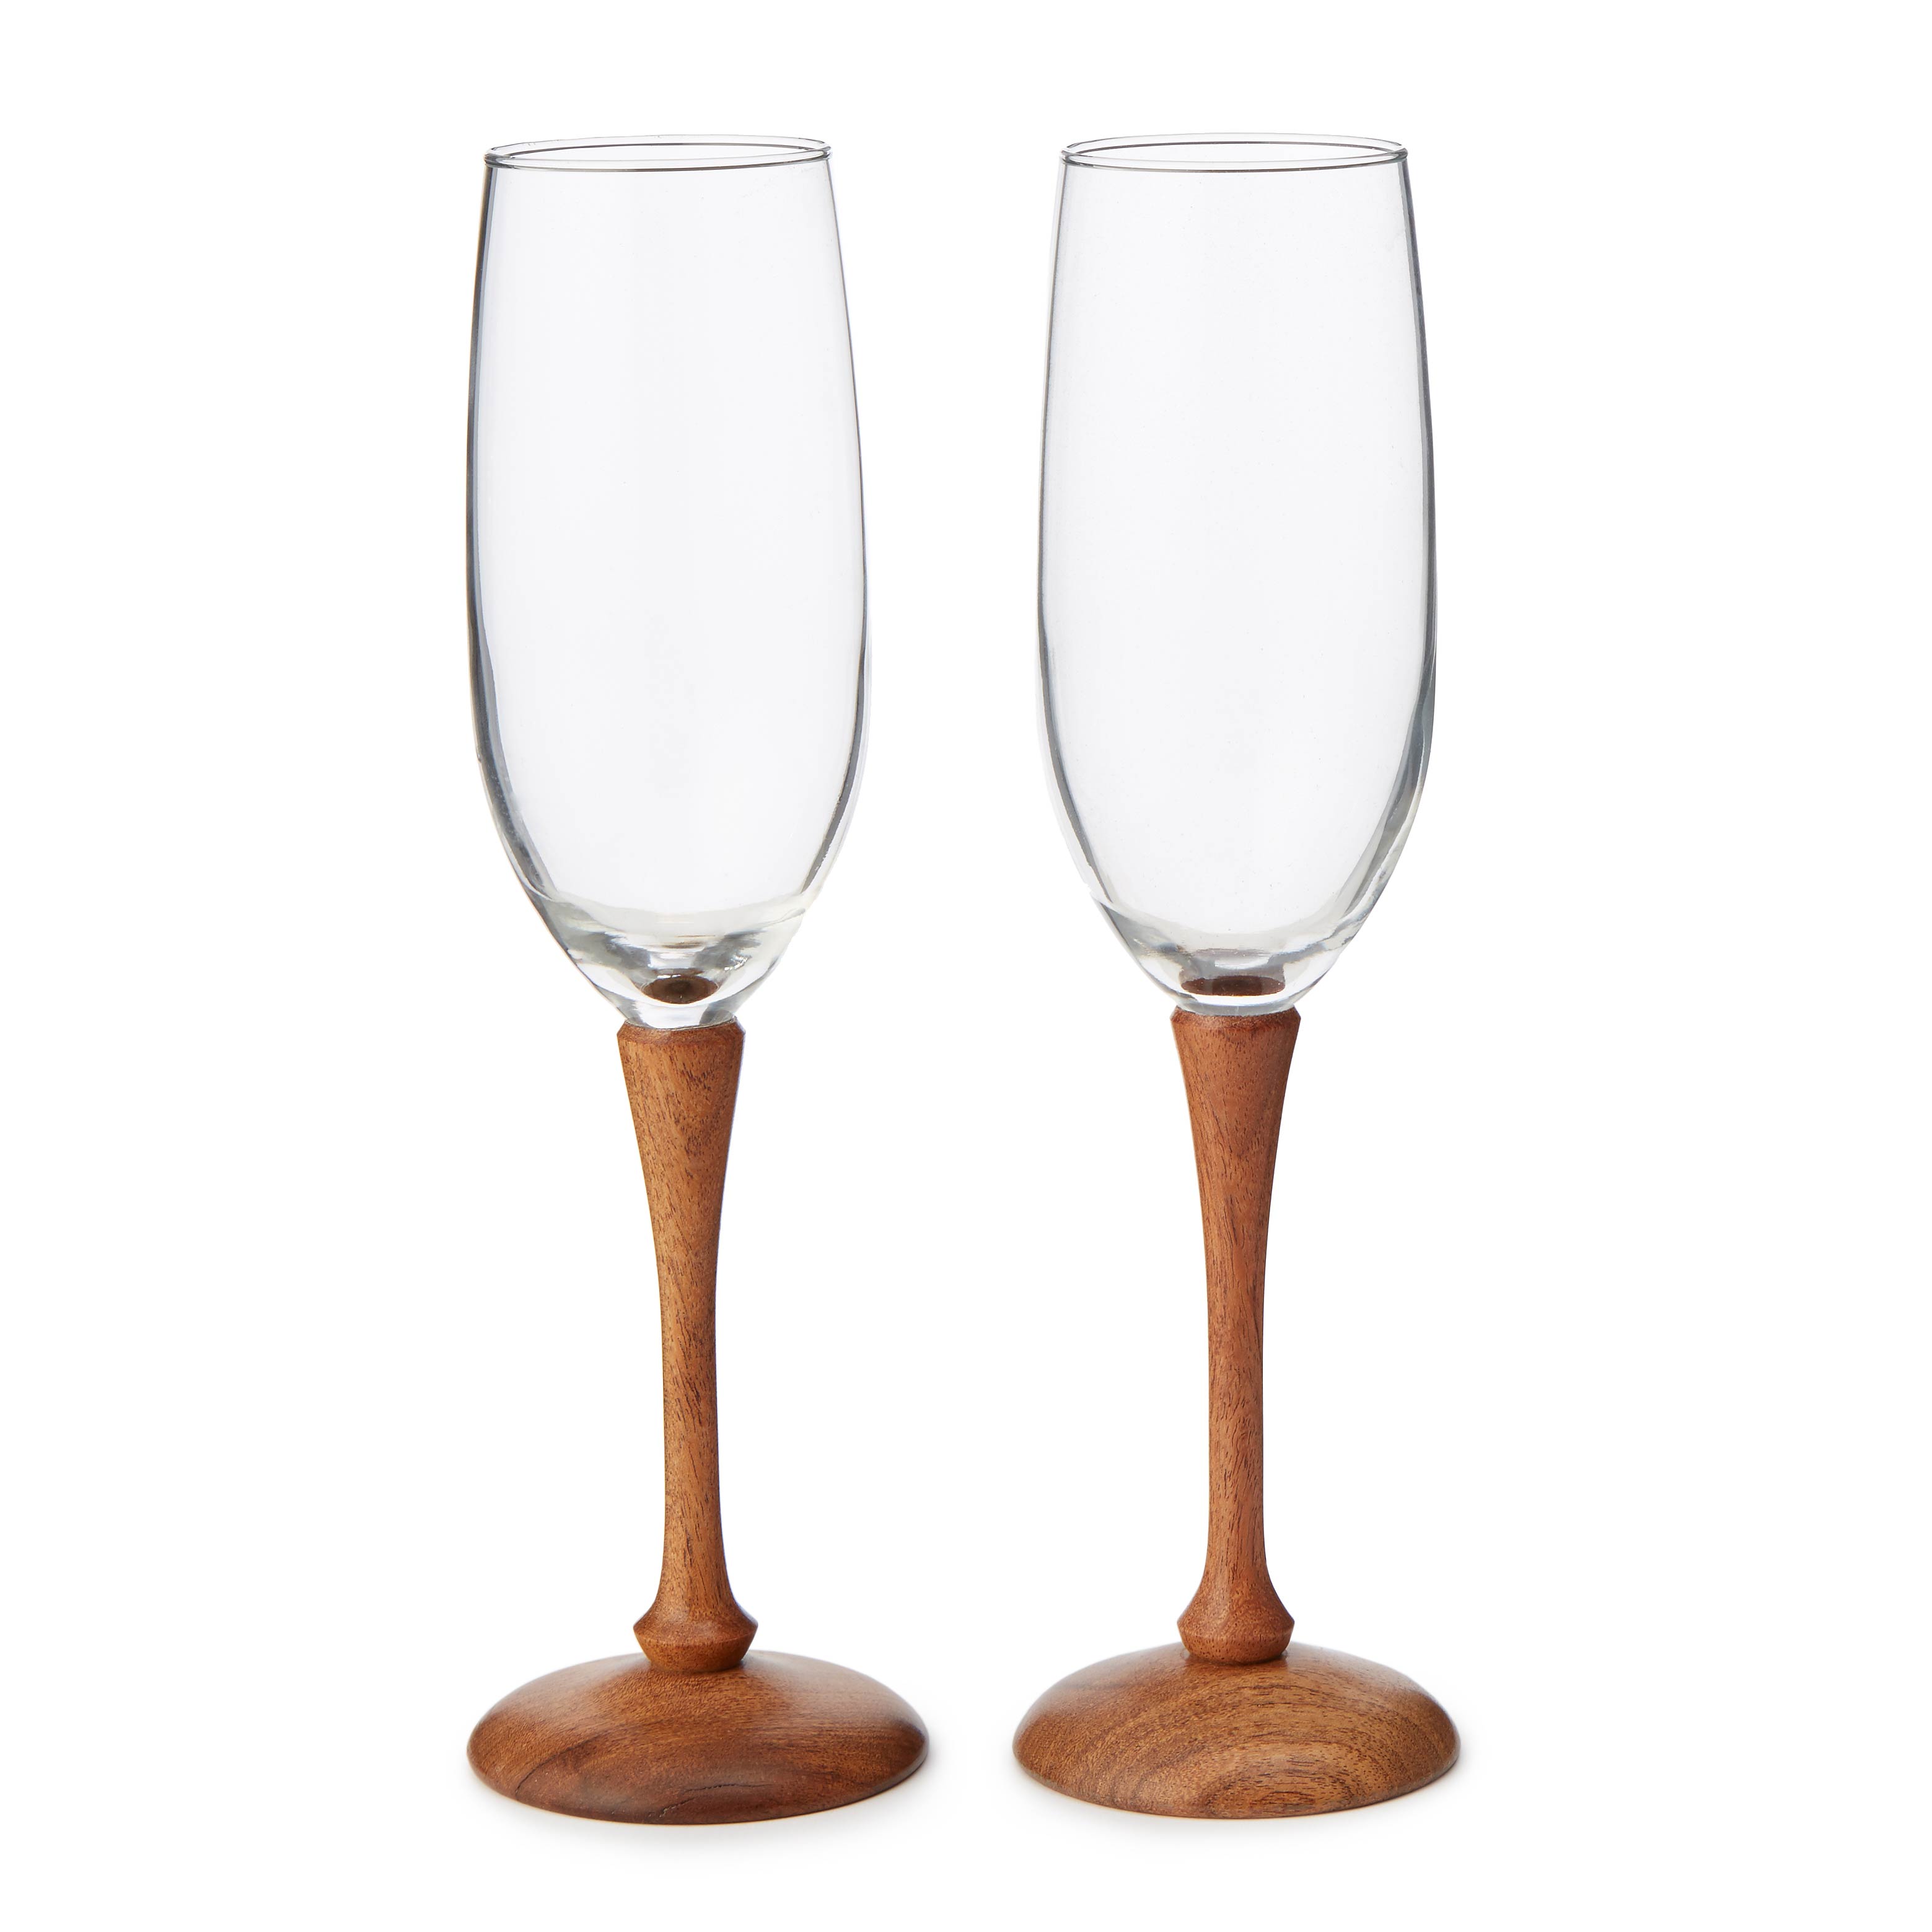 Wood Stem Champagne Flutes - Set of 2 | mesquite wood | UncommonGoods